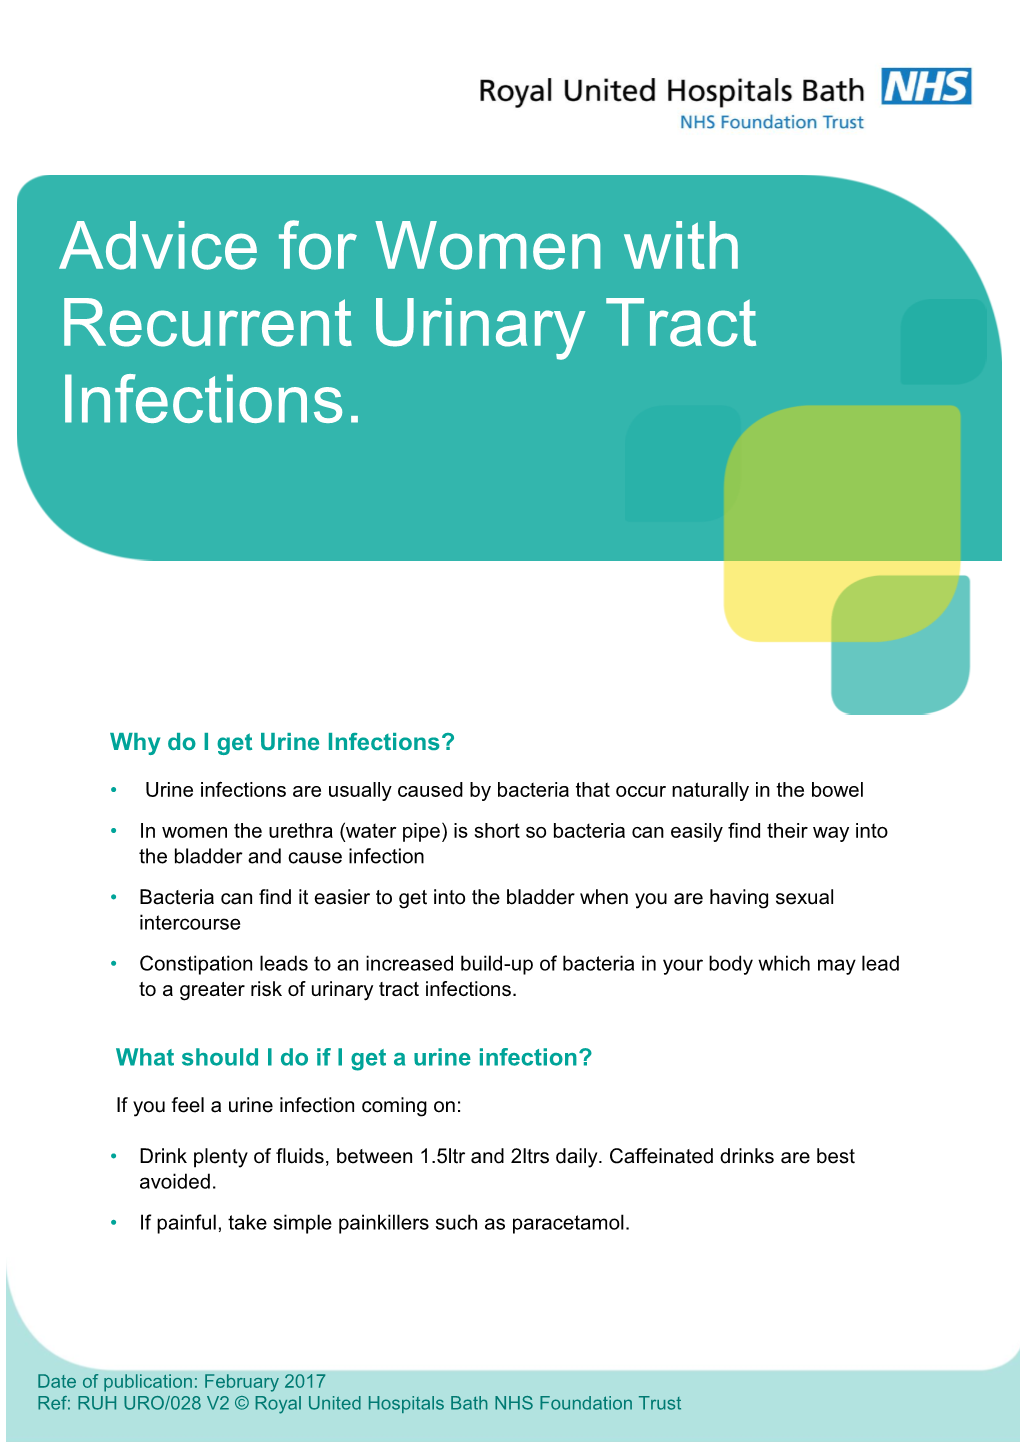 Advice for Women with Recurrent Urinary Tract Infections